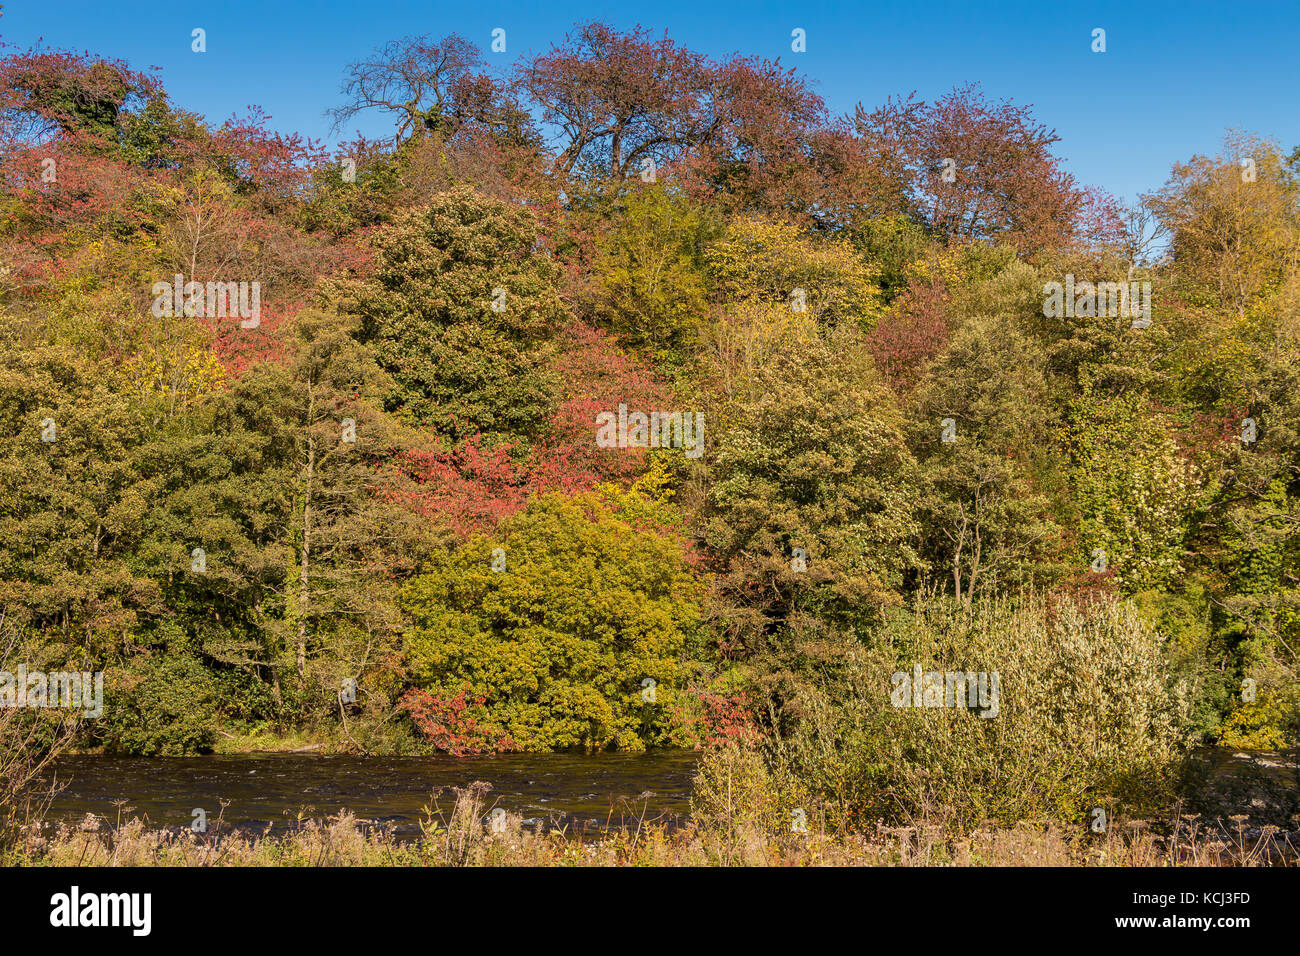 Autumn colour, reds and golds in mixed deciduous woods on the banks of the river Tees near Wycliffe, Teesdale, UK October 2017 Stock Photo